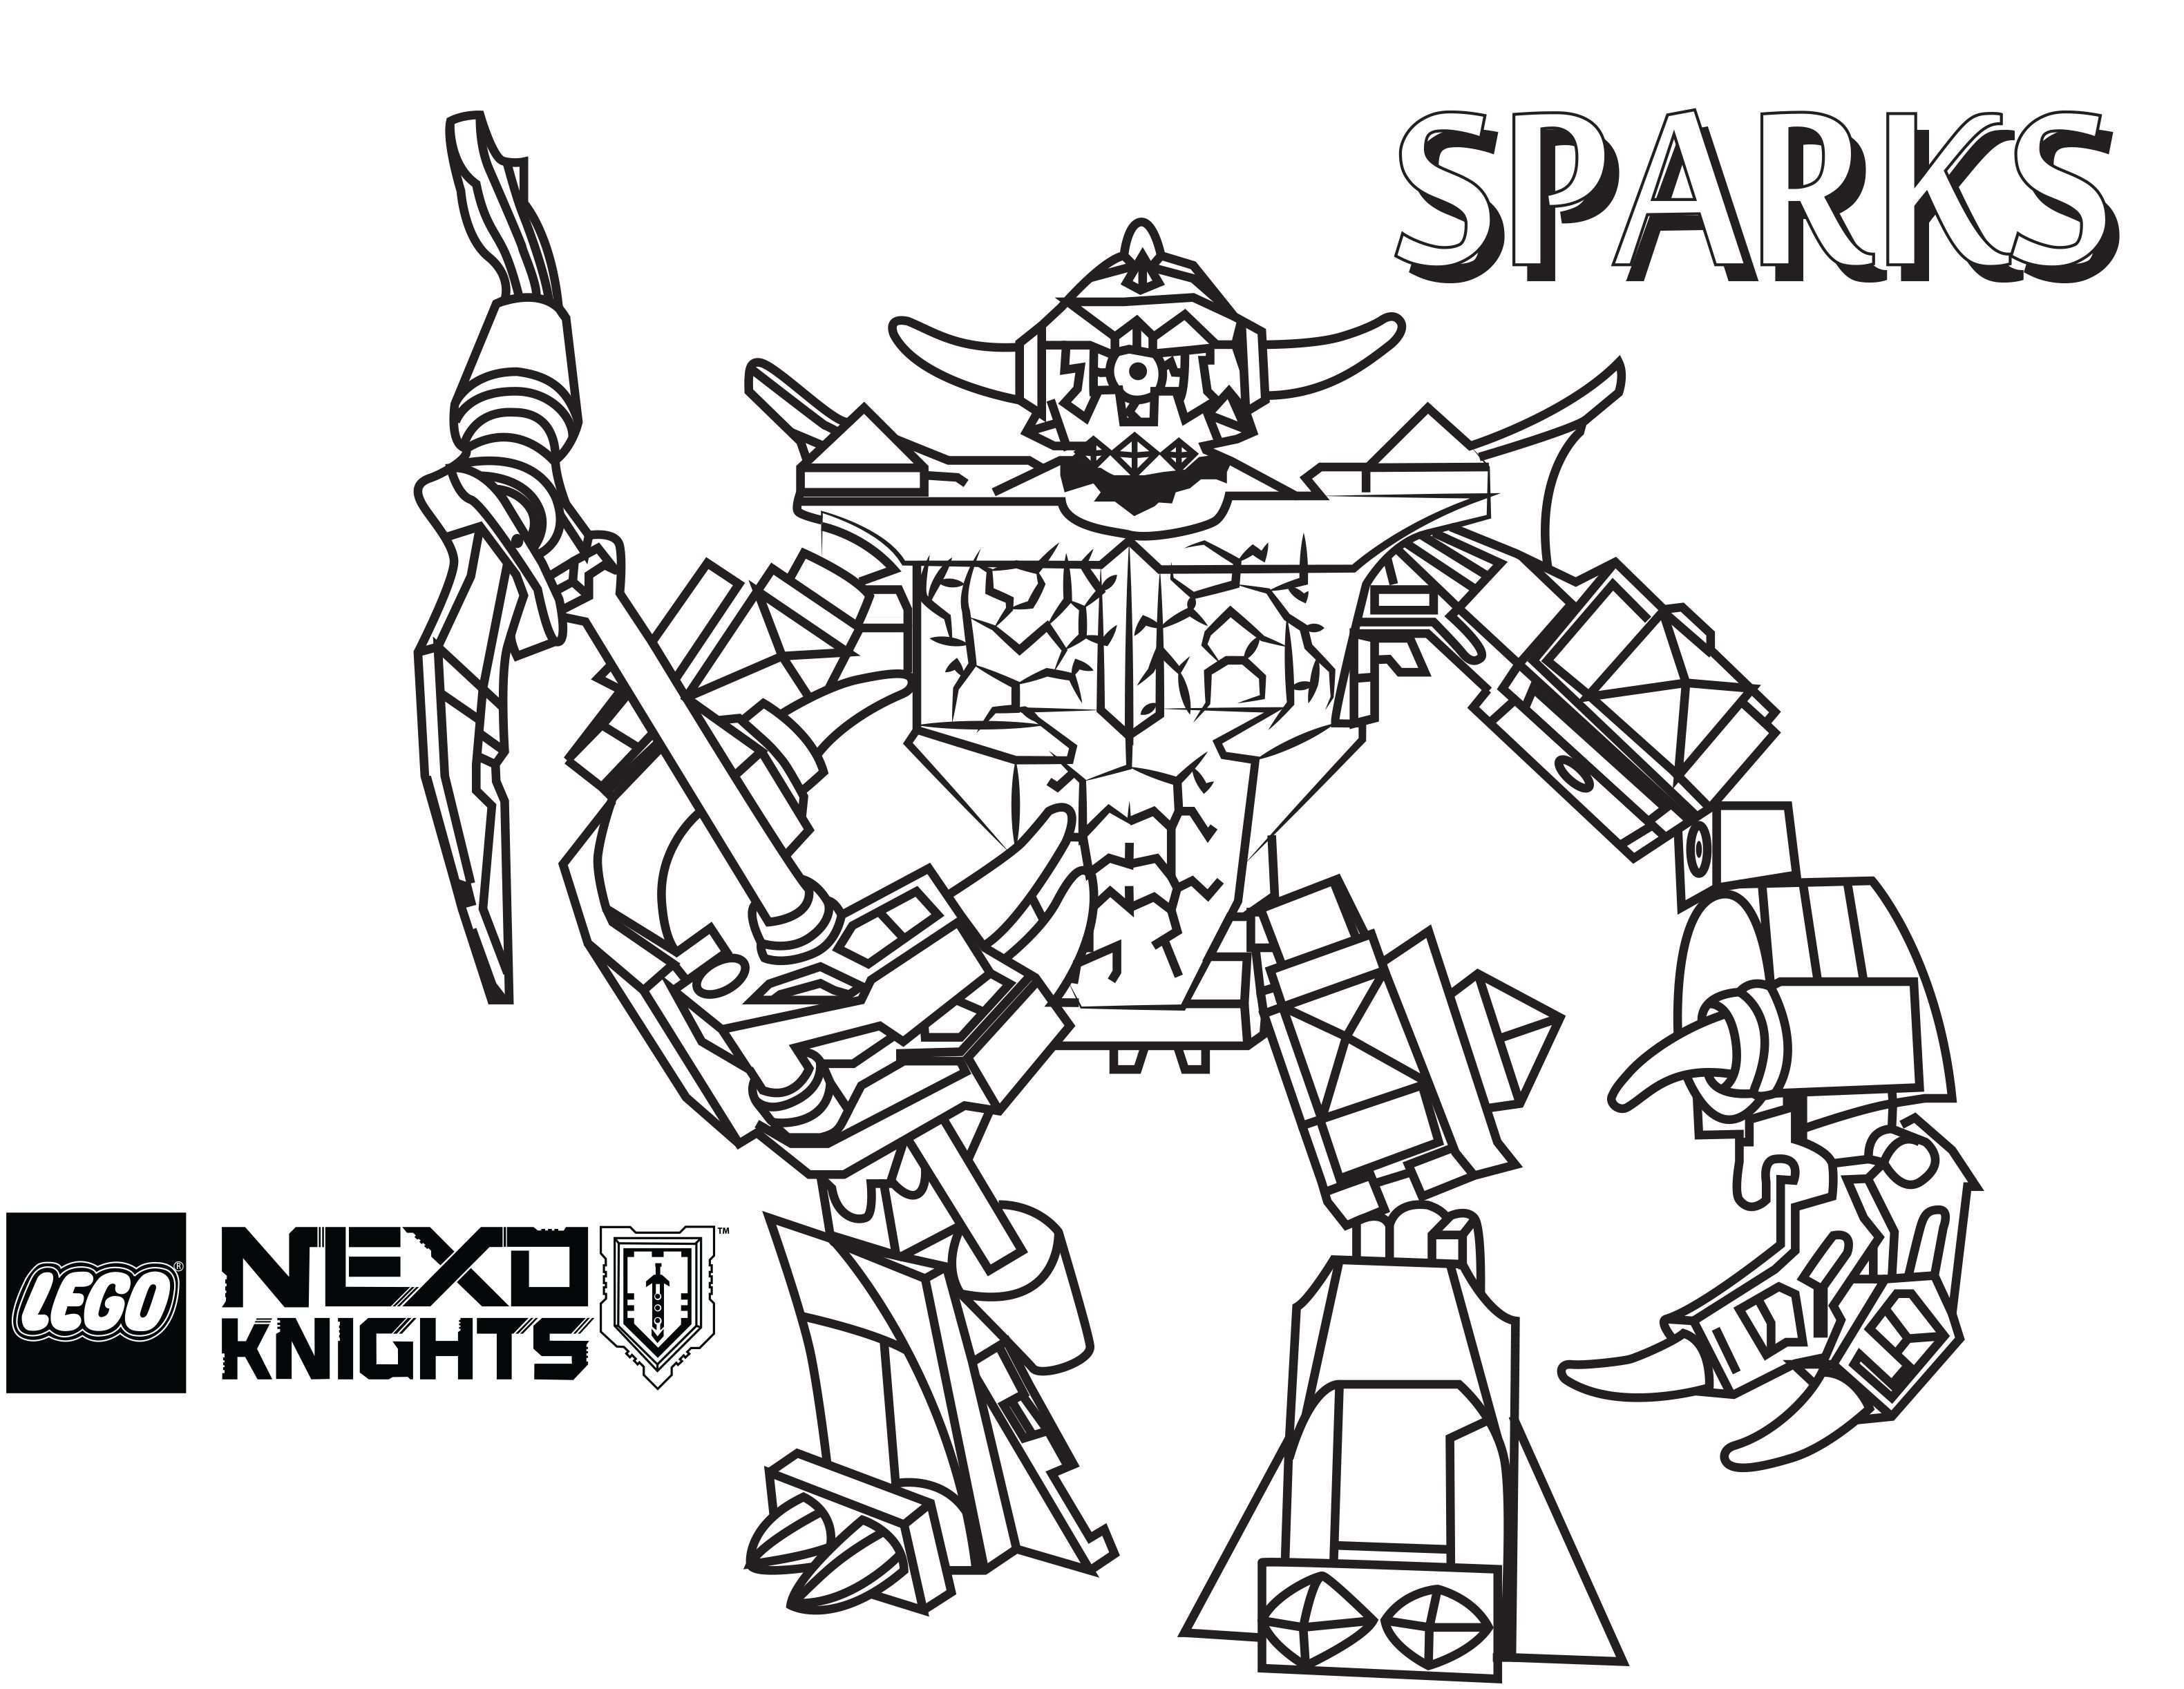 Nexo Lego Knights Coloring Pages Sketch Coloring Page Lego Coloring Pages Lego Knights Coloring Pages